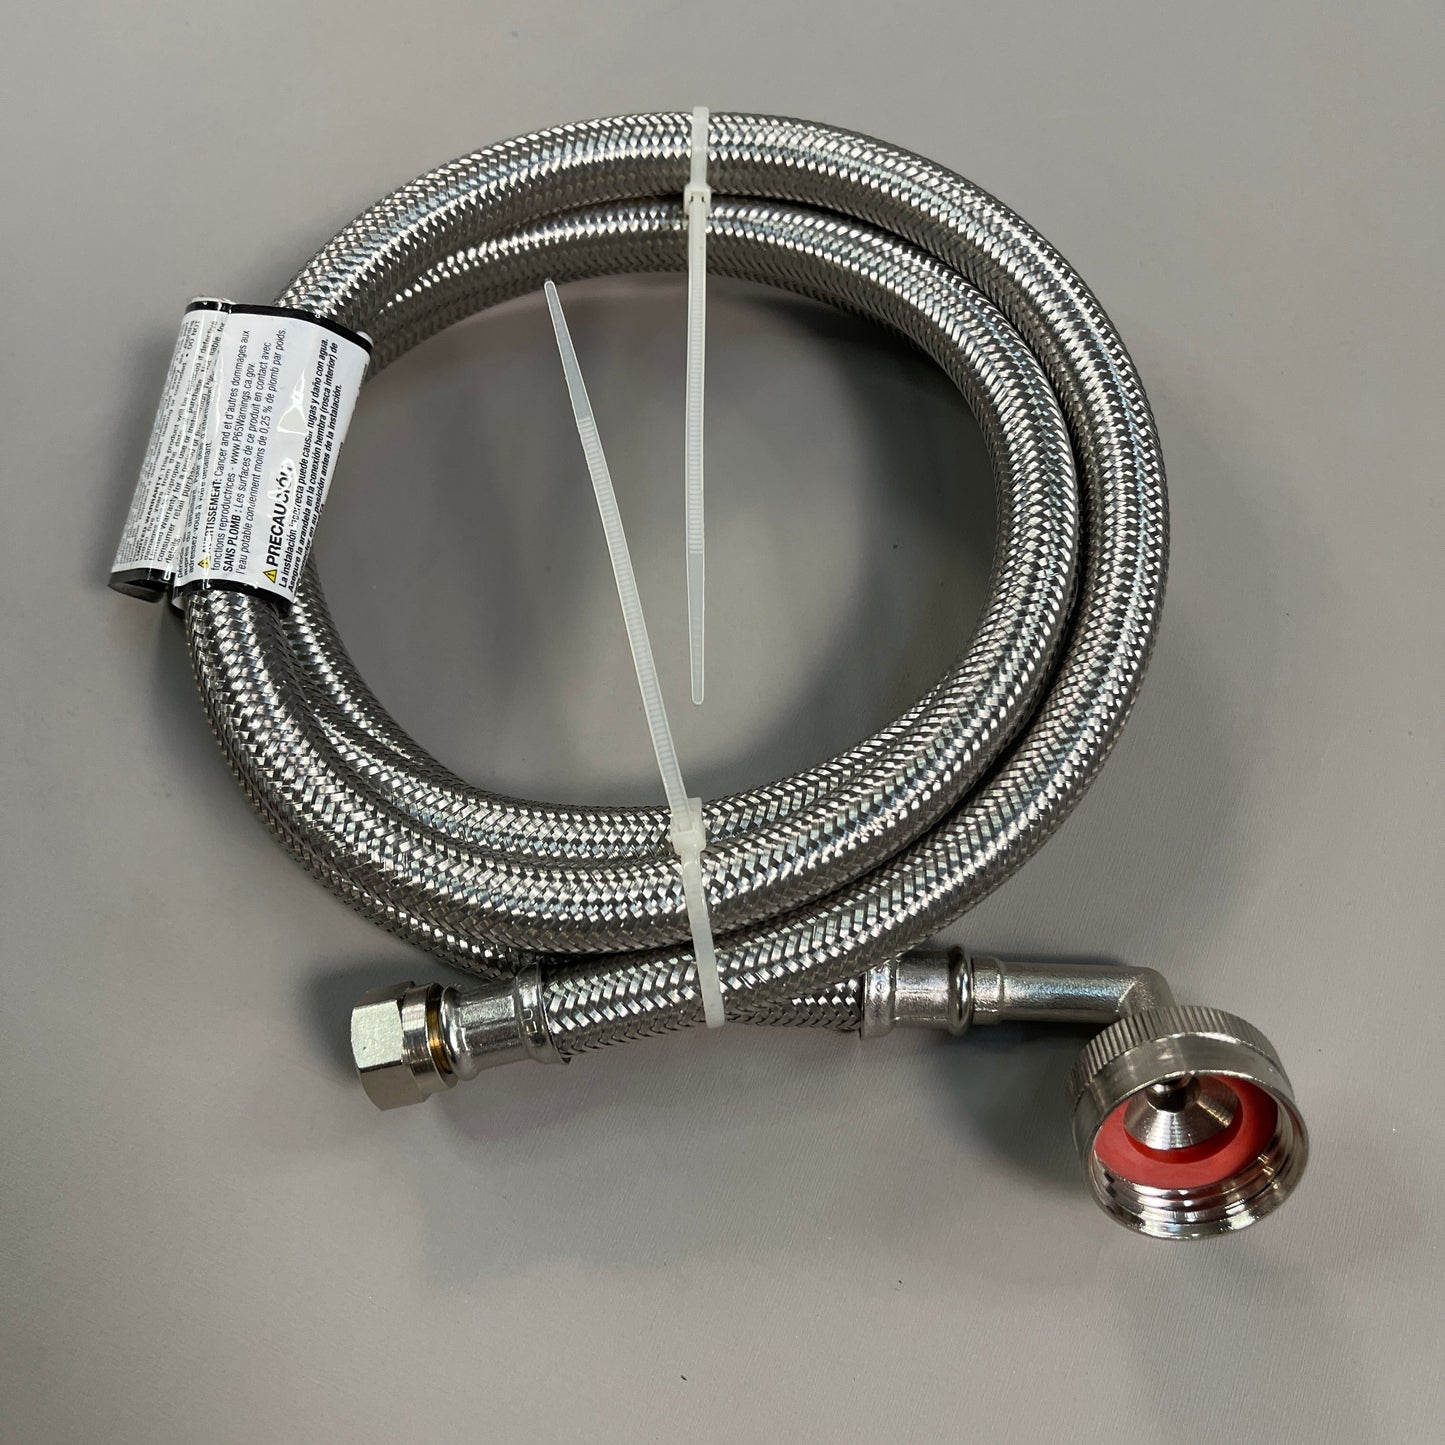 ELECTROLUX 6 ft Dishwasher Braided Stainless Waterline Molded 3/4" To Hose Elbow 5304520432 (New)